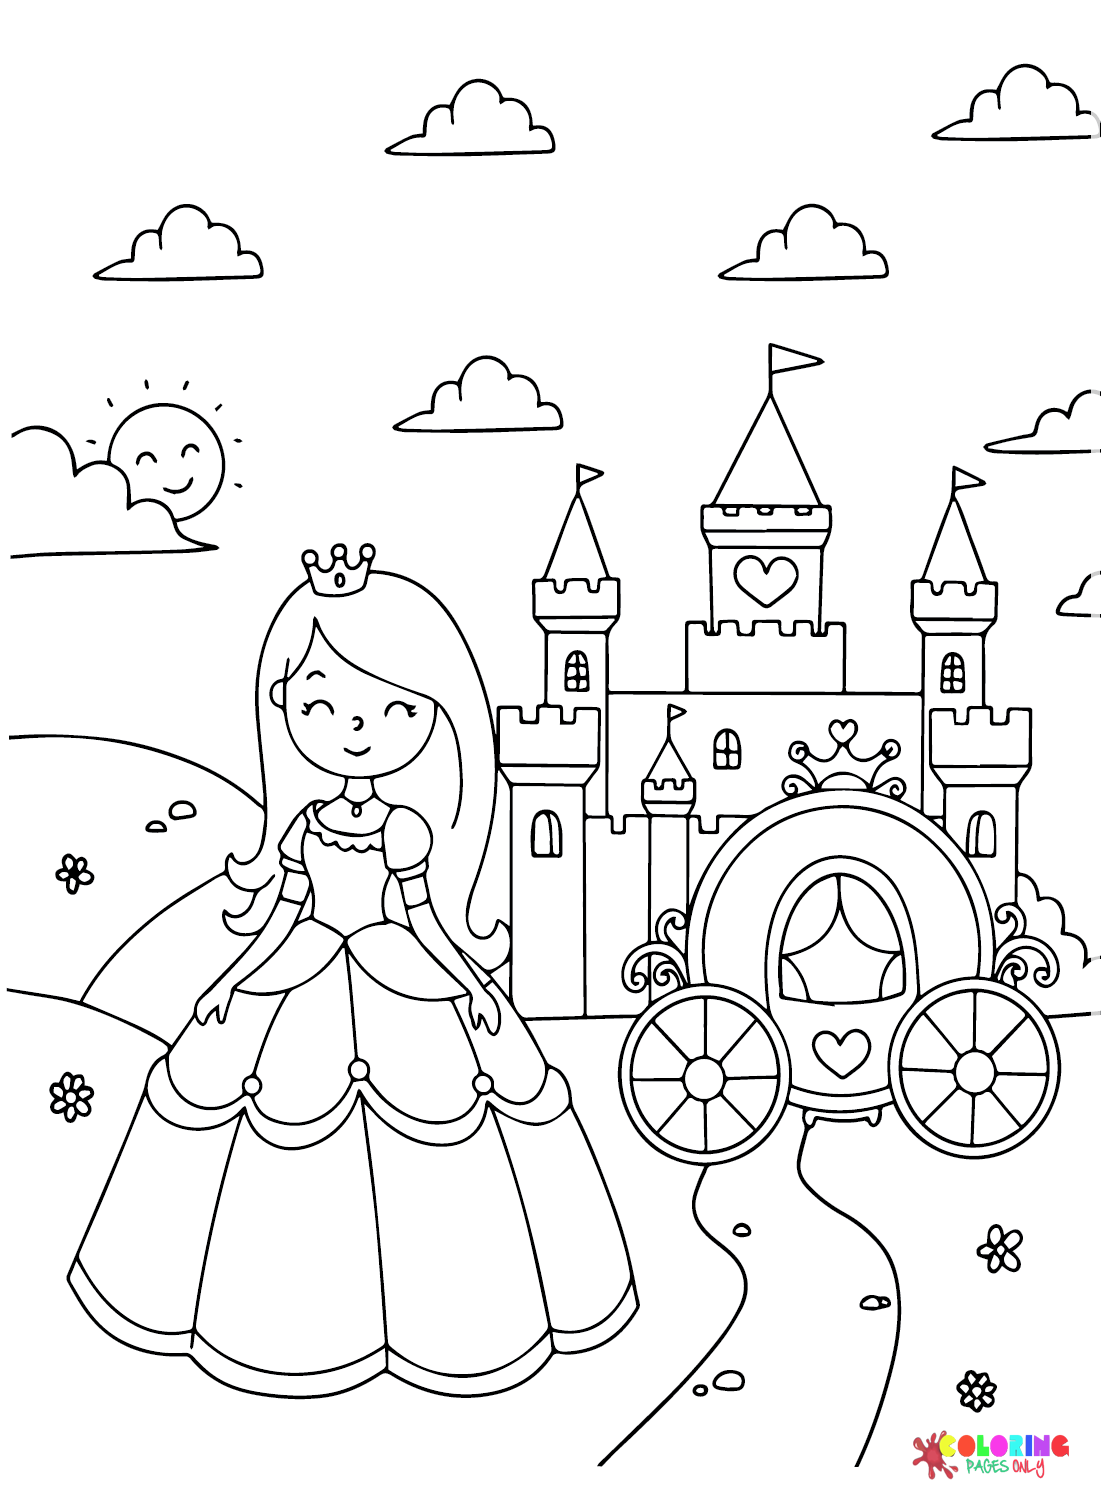 Queen with Castle Coloring Page